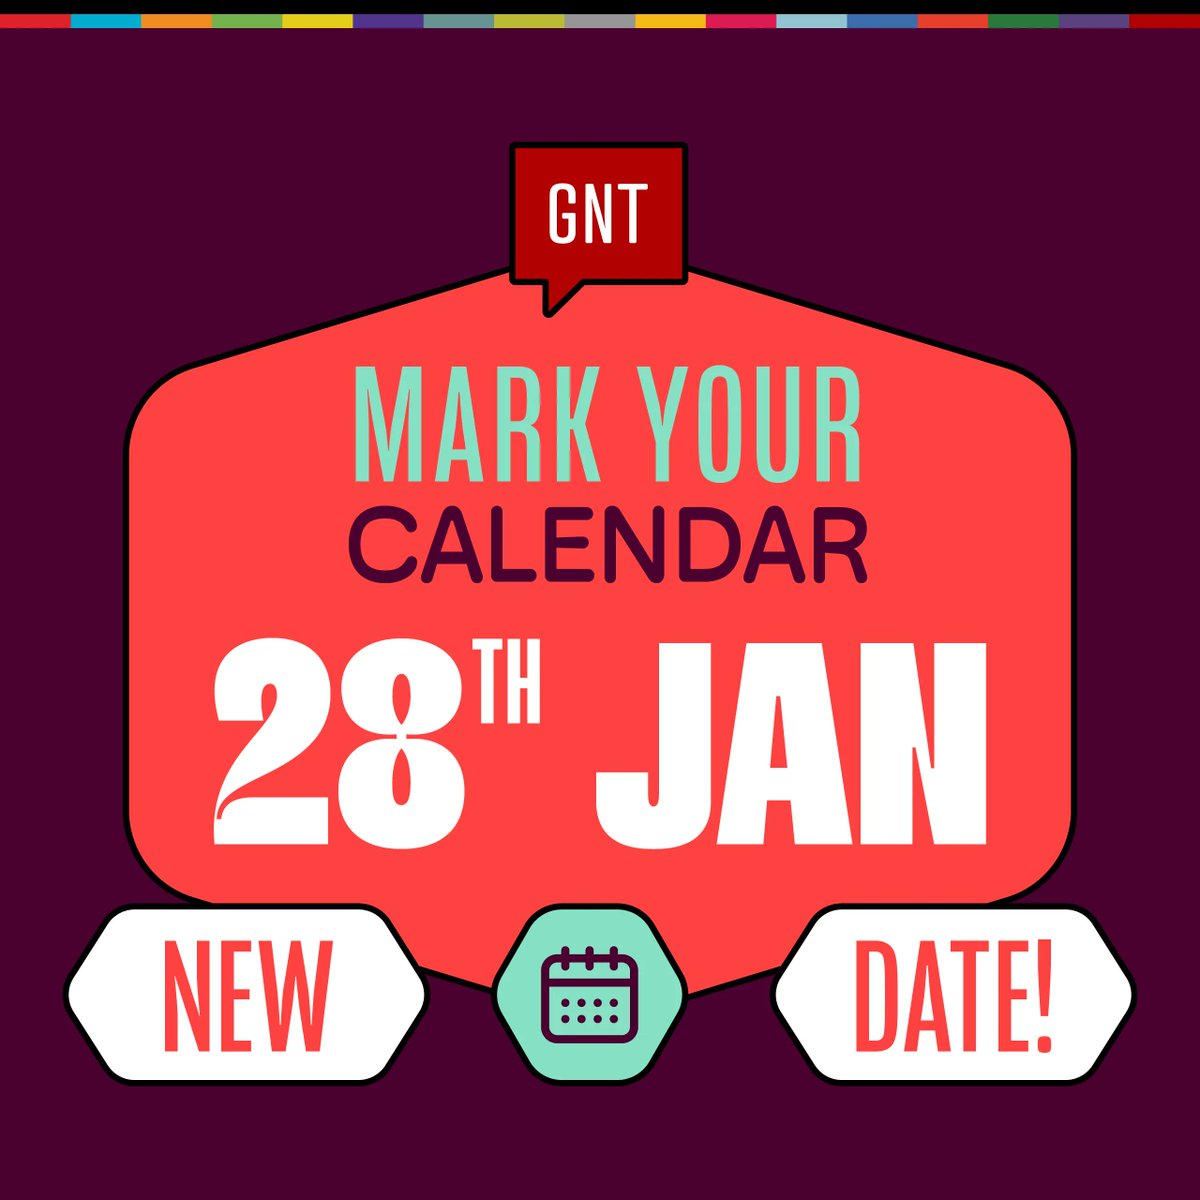 We've finally confirmed a new date for our postponed December event! Mark your calendar: 📅 Fri 28th Jan, 8:30am If you want to be notified once we open our registration, you can join our mailing list here 👉 buff.ly/3GWyDAw #CMGnt #CreativeMornings #CMinvisible